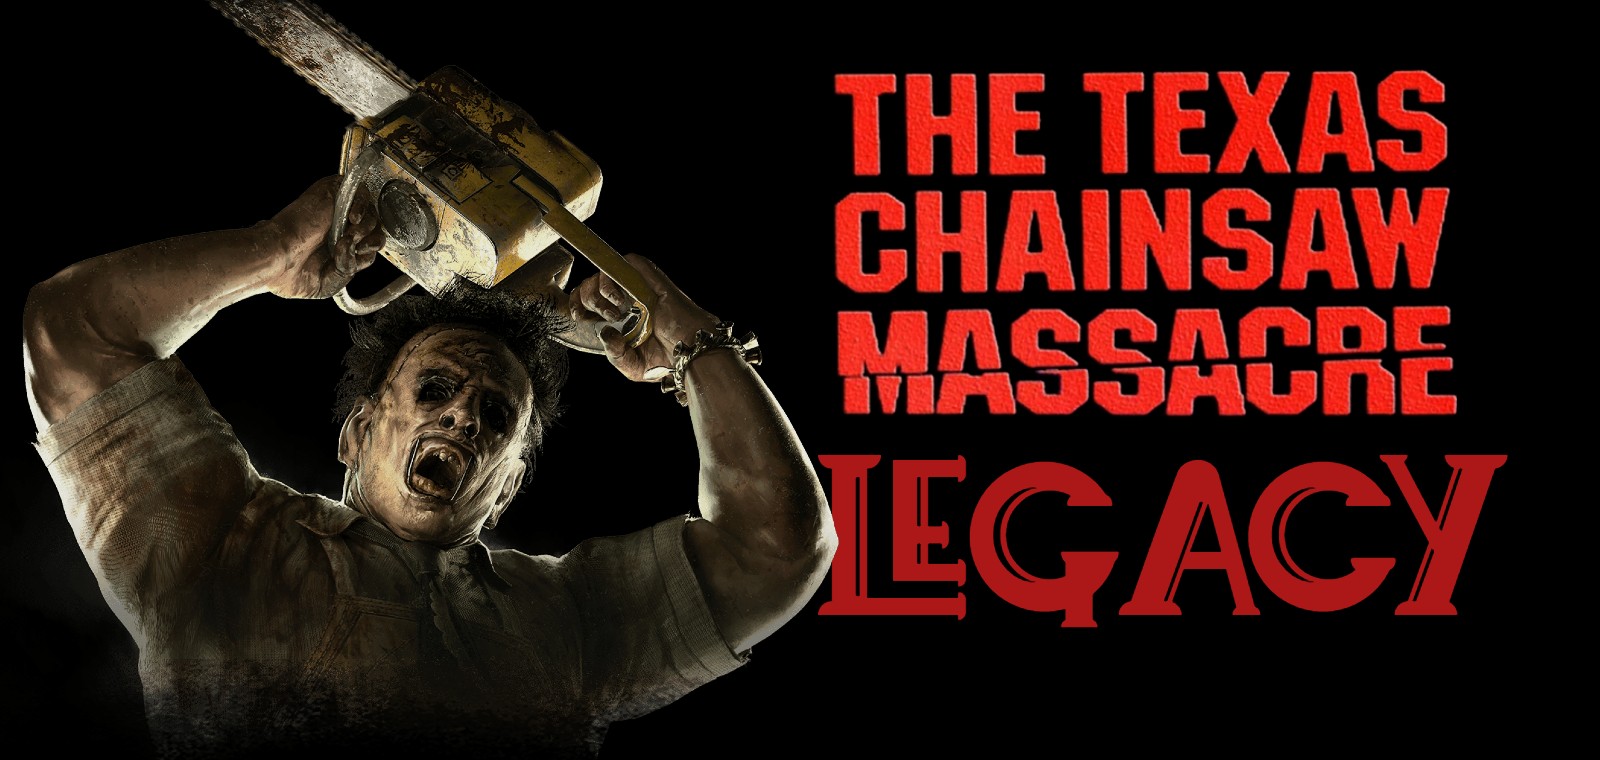 TEXAS CHAINSAW MASSACRE – 4 Theories About The Rumored Sequel